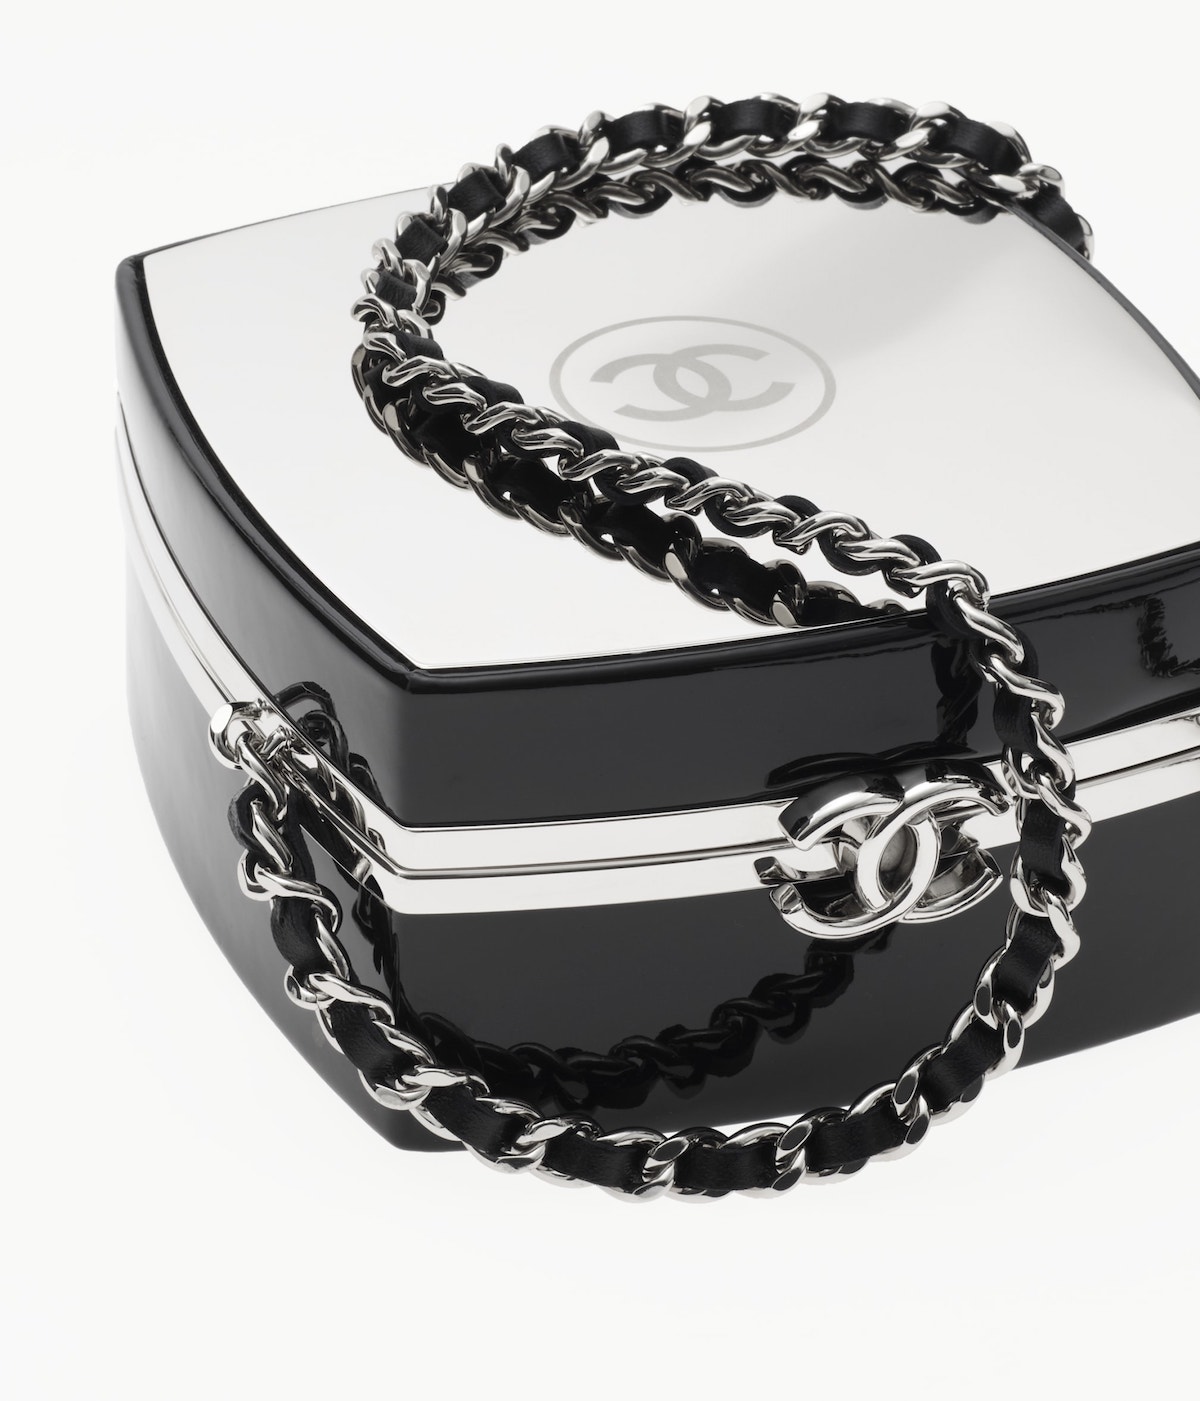 Chanel Silver Black Compact Powder Clutch With Chain